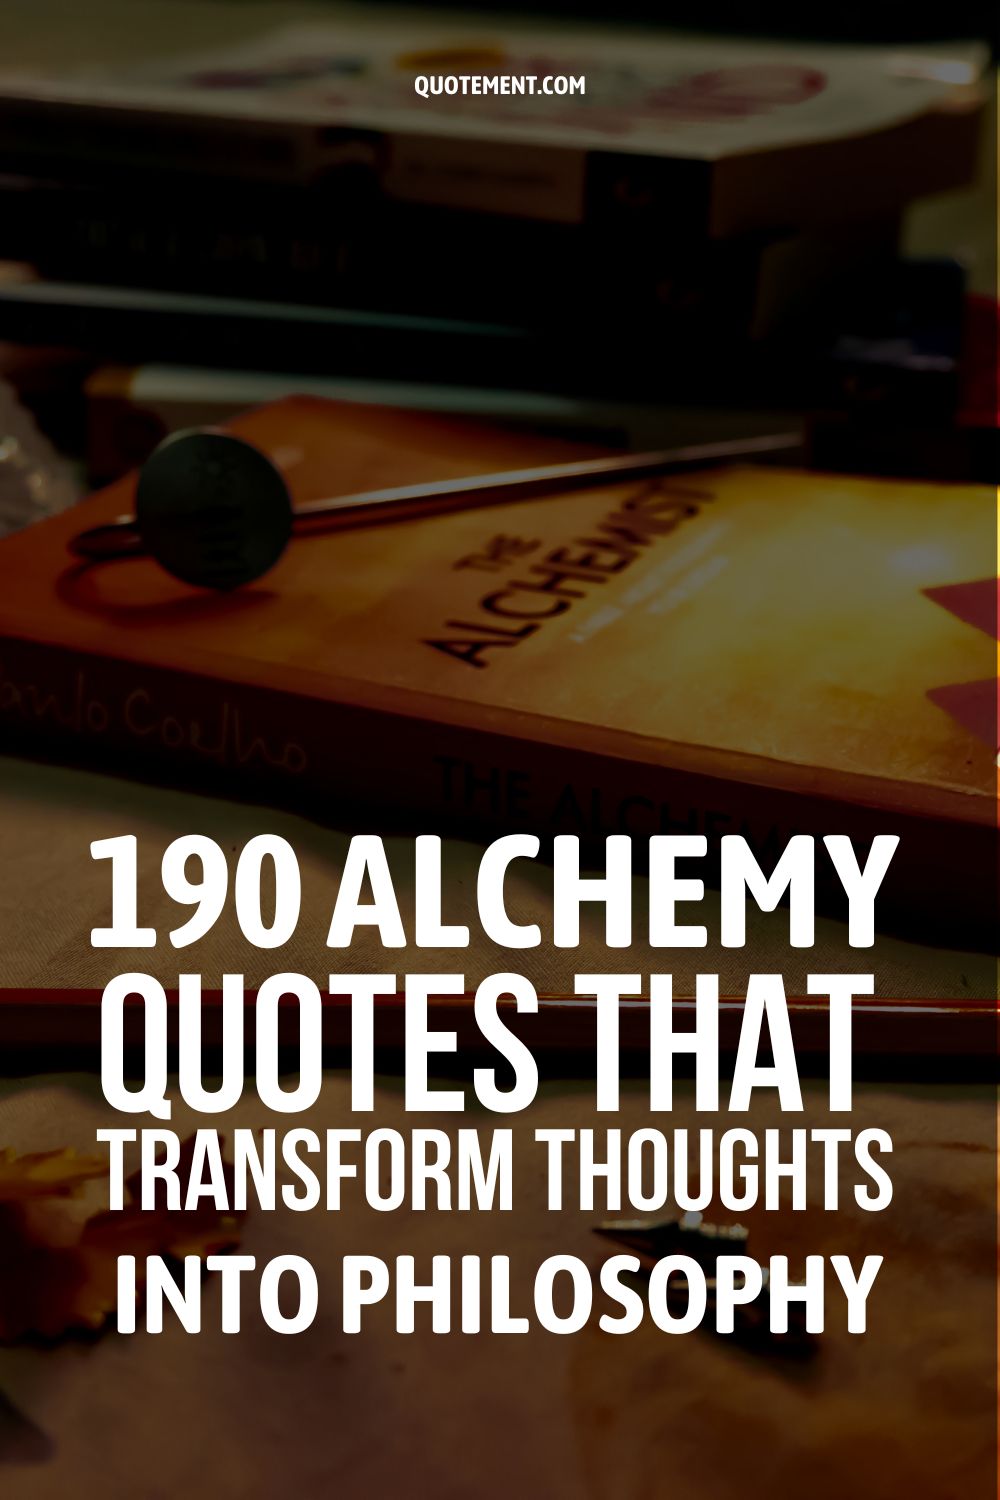 190 Alchemy Quotes That Transform Thoughts into Philosophy